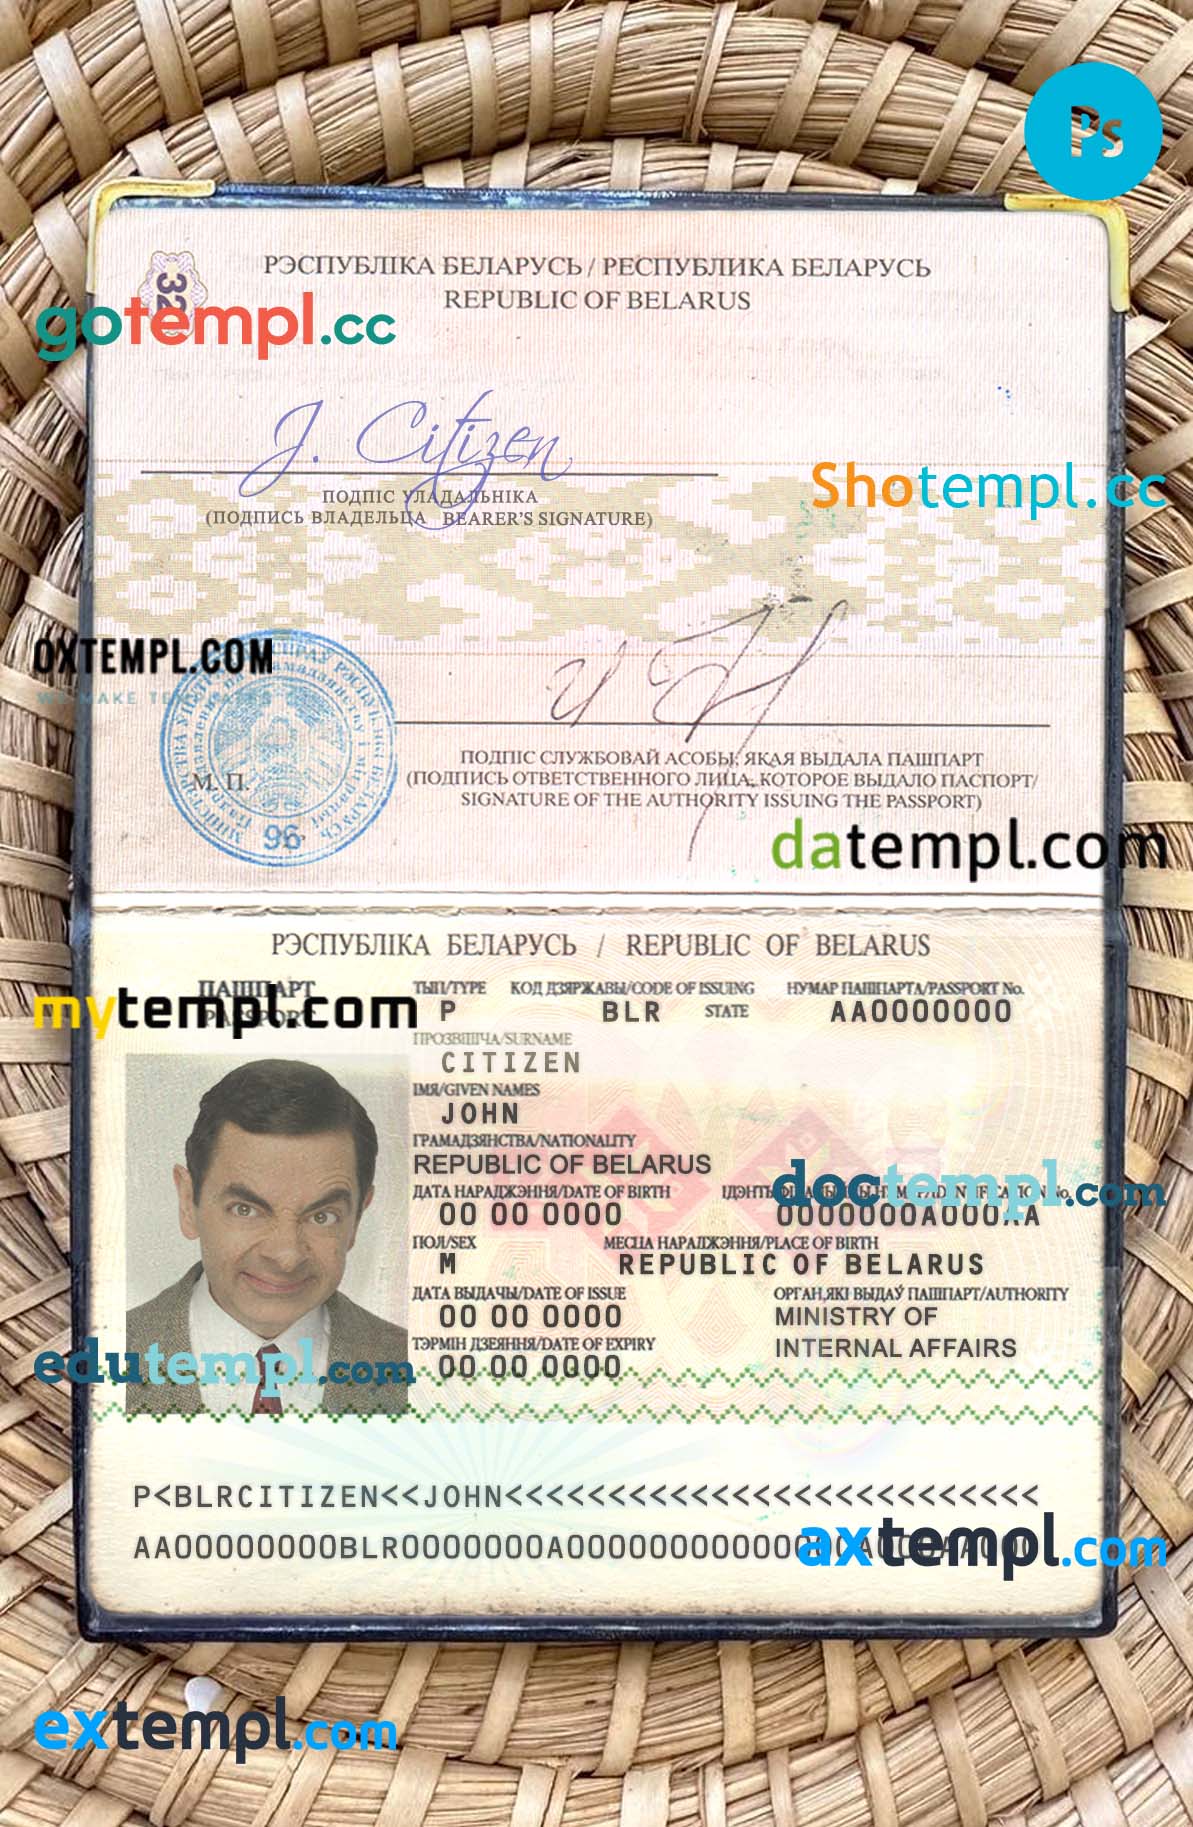 USA Maine state death certificate template in PSD format, fully editable